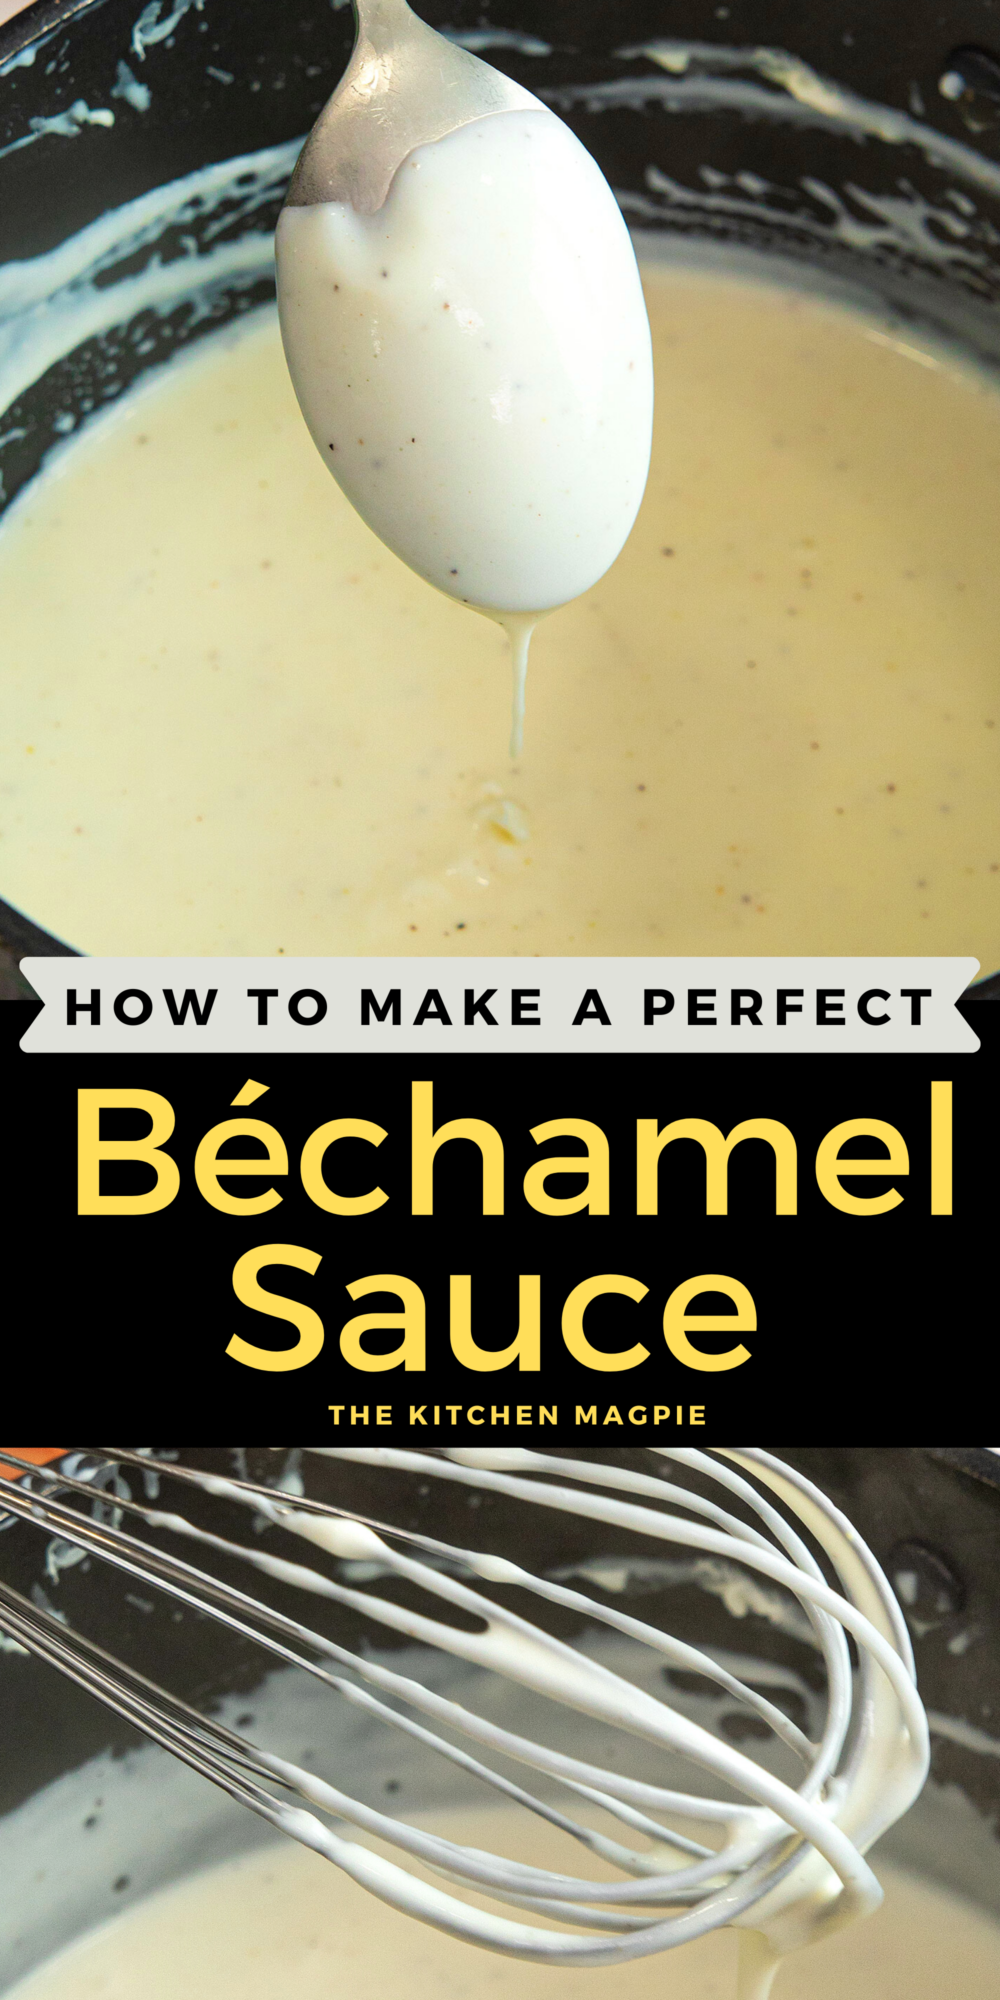 Béchamel - also called white sauce or white gravy -is a cooked mixture of butter, flour, and milk with salt and pepper. This is most commonly used as a base for cheese sauces.